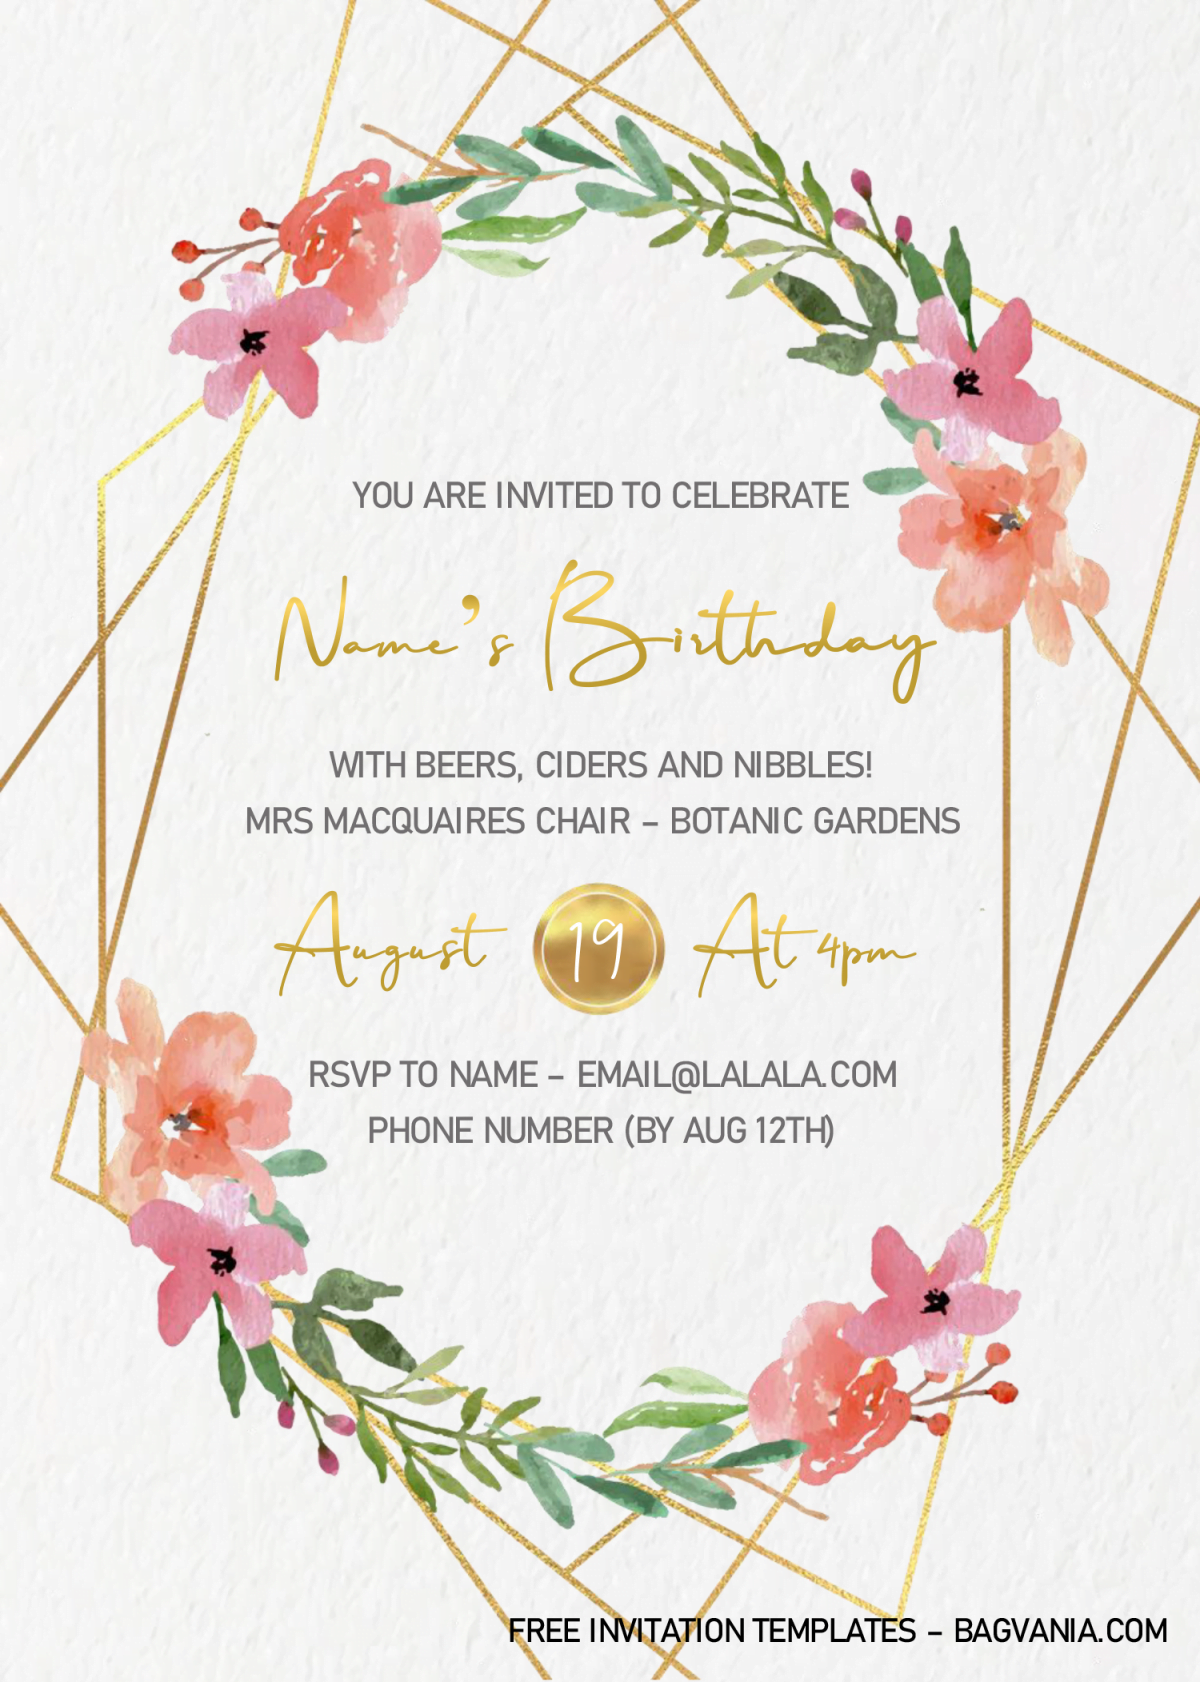 Gold Geometric Invitation Templates - Editable .Docx and has gold geometric text frame